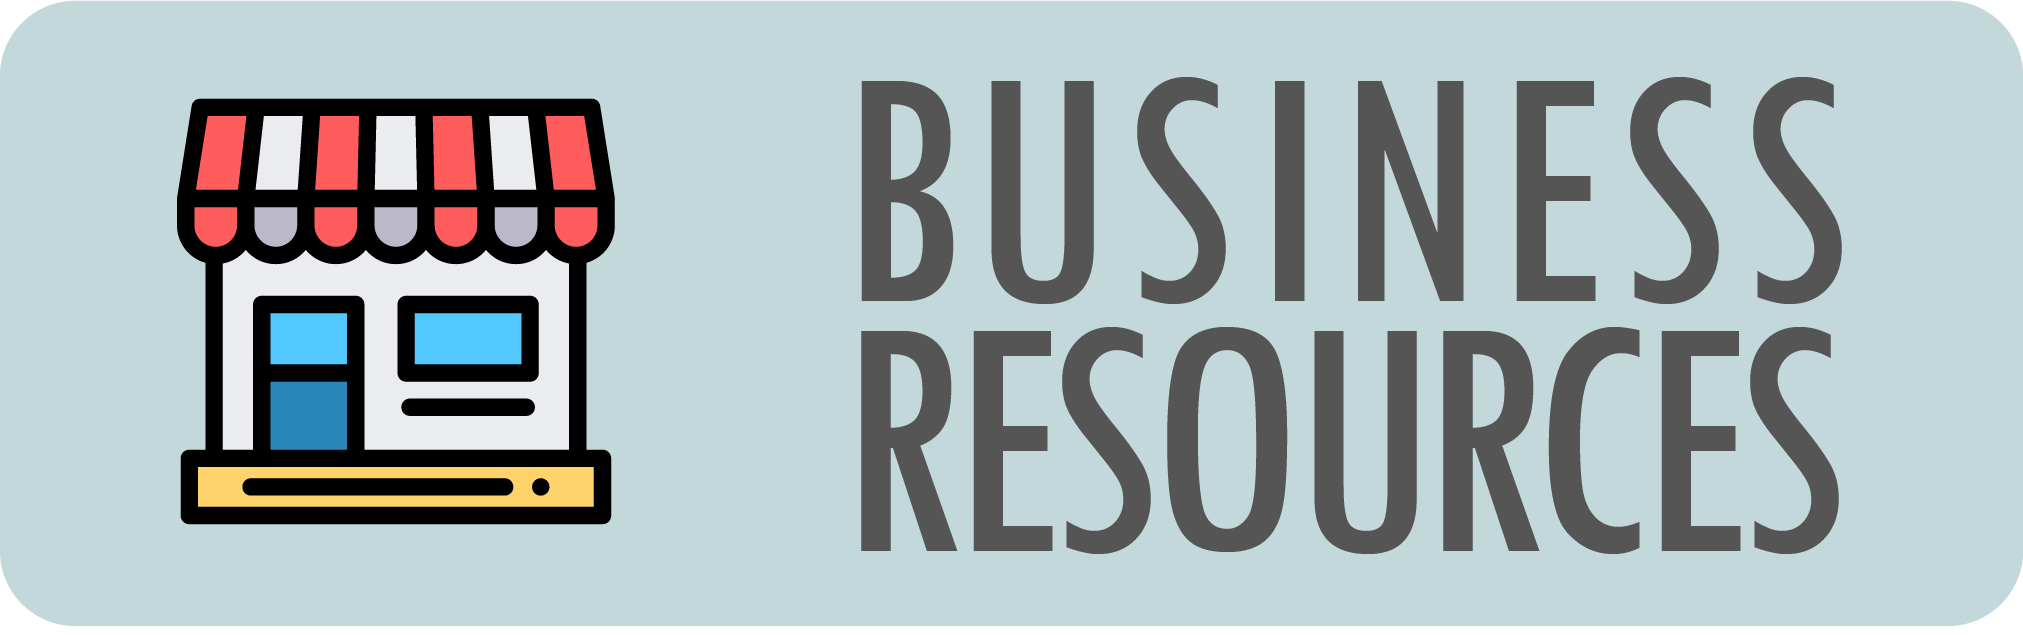 Business Resources